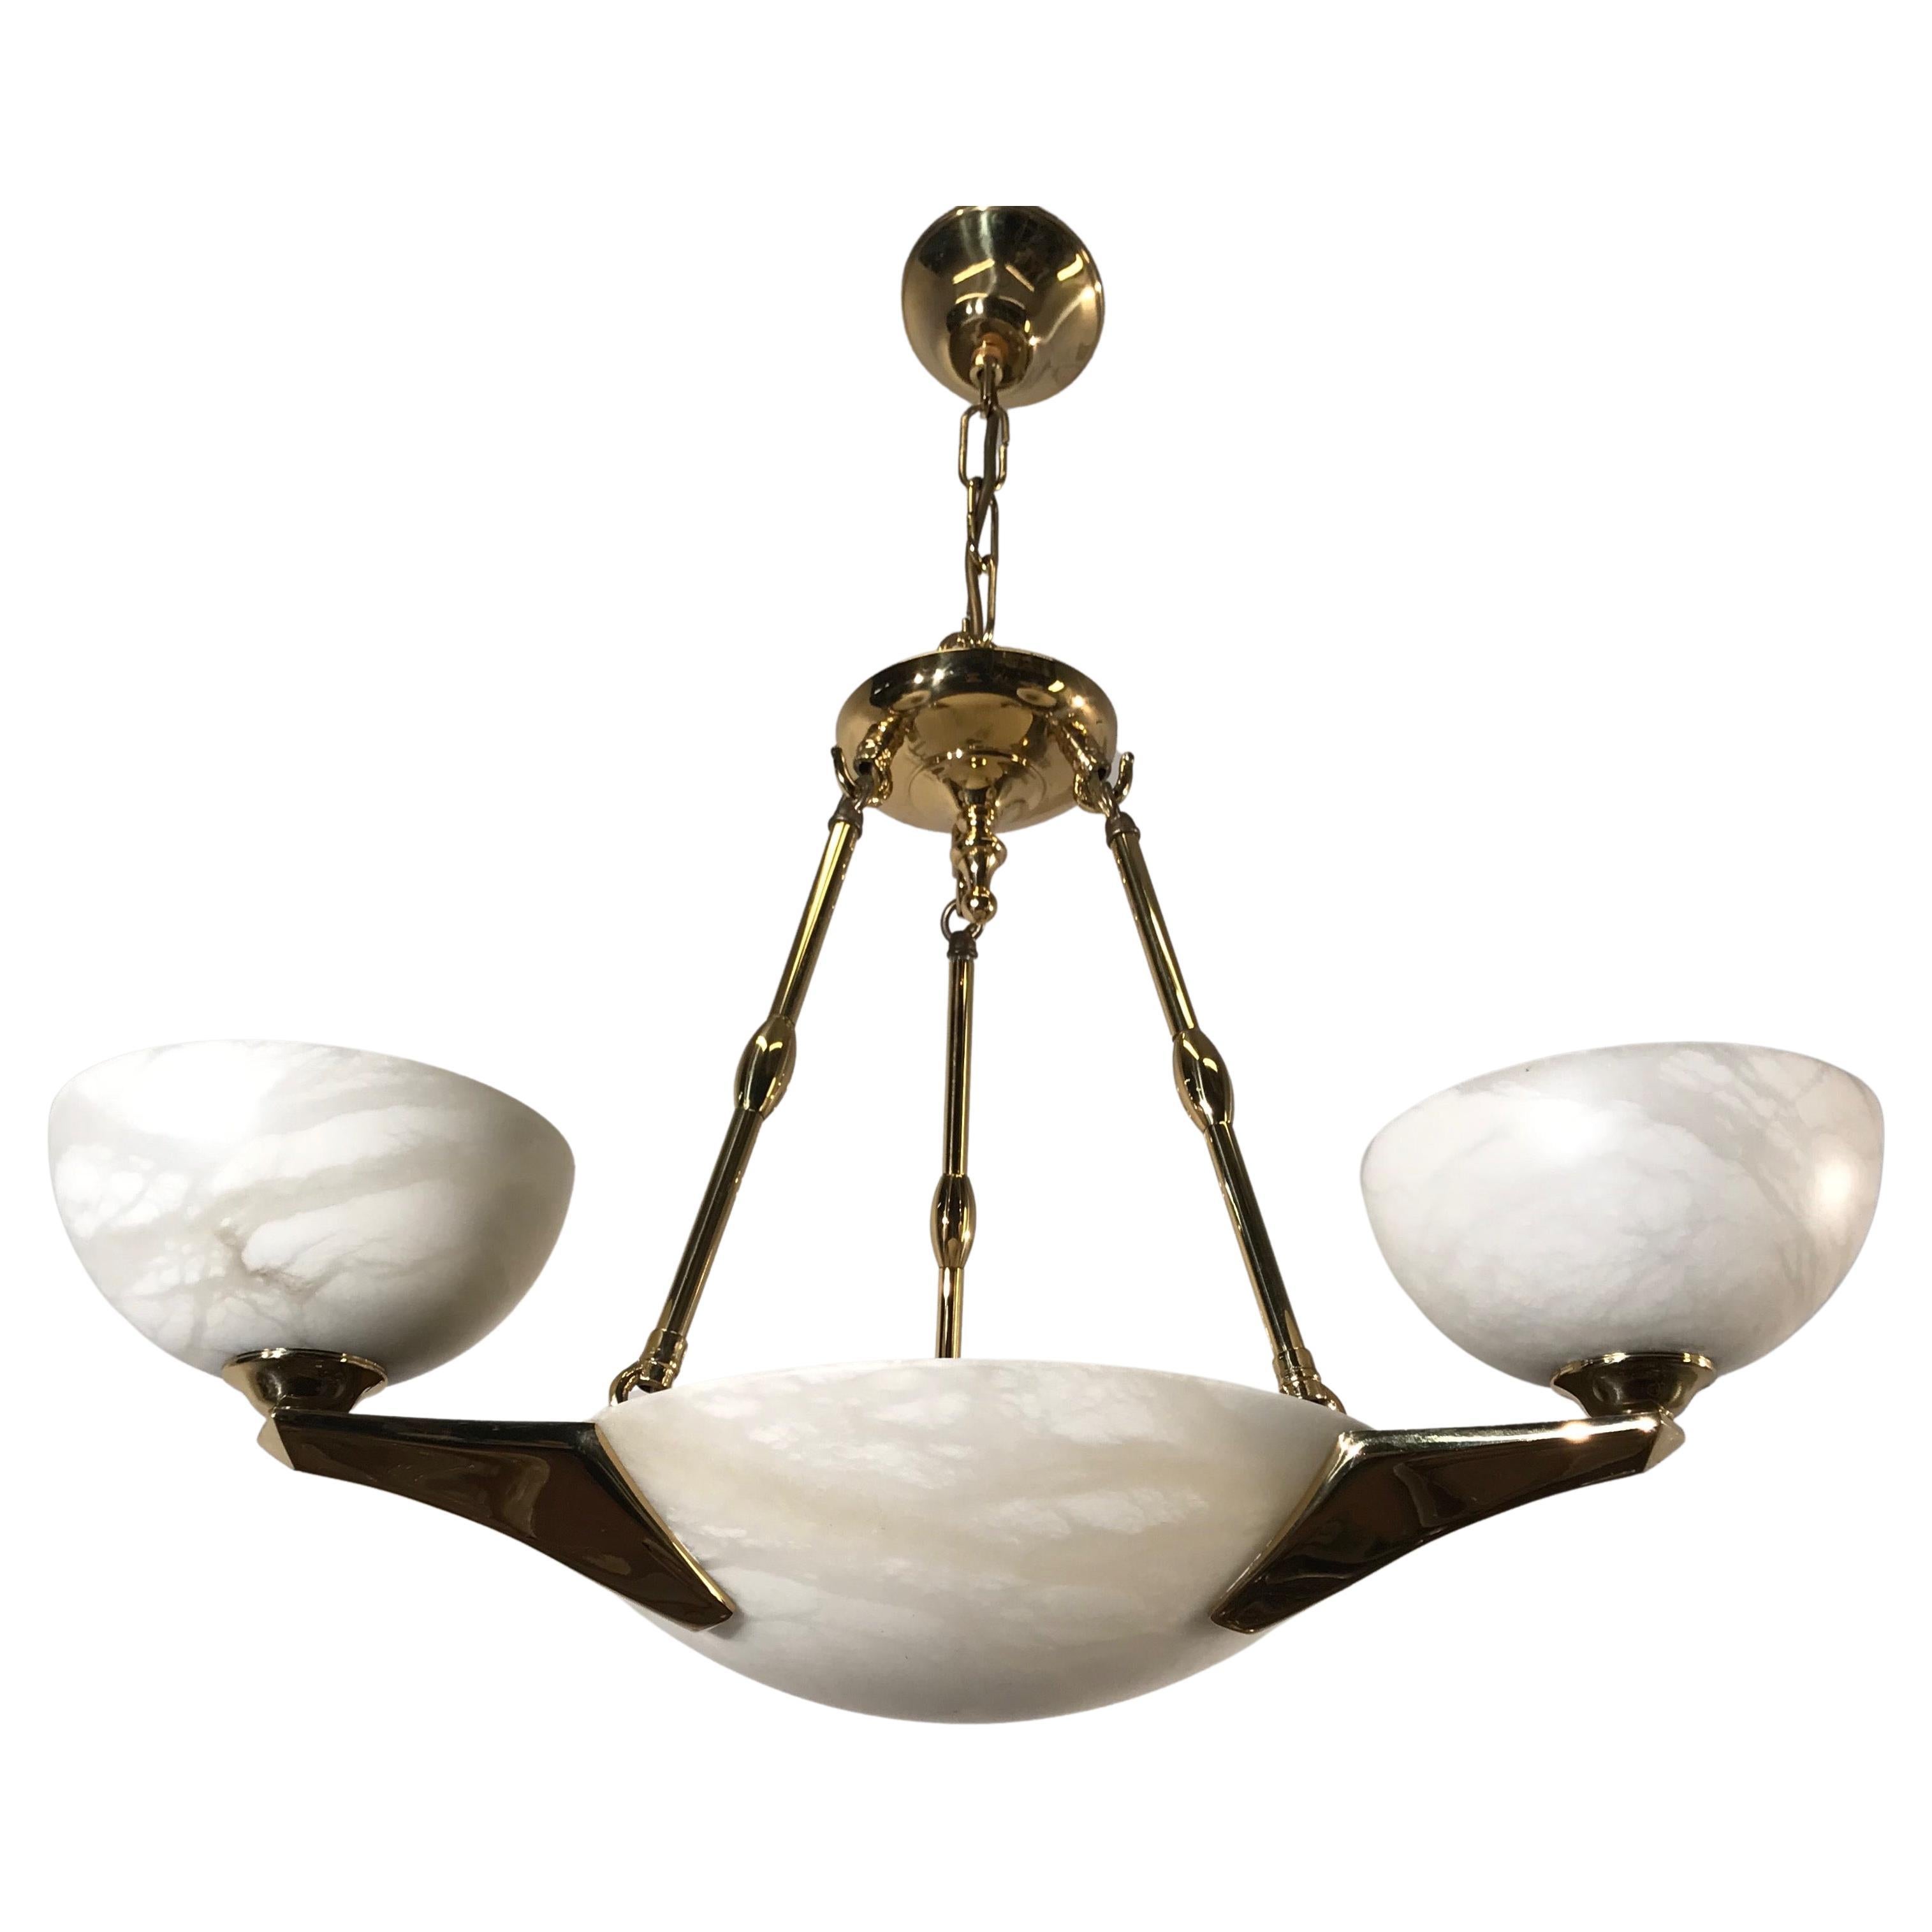 Excellent condition, Arts and Crafts style chandelier.

If you like pendants / chandeliers in the Arts and Crafts style and you prefer to have them looking like new, then this 1970s alabaster shades and bronze arms light fixture could be perfect for